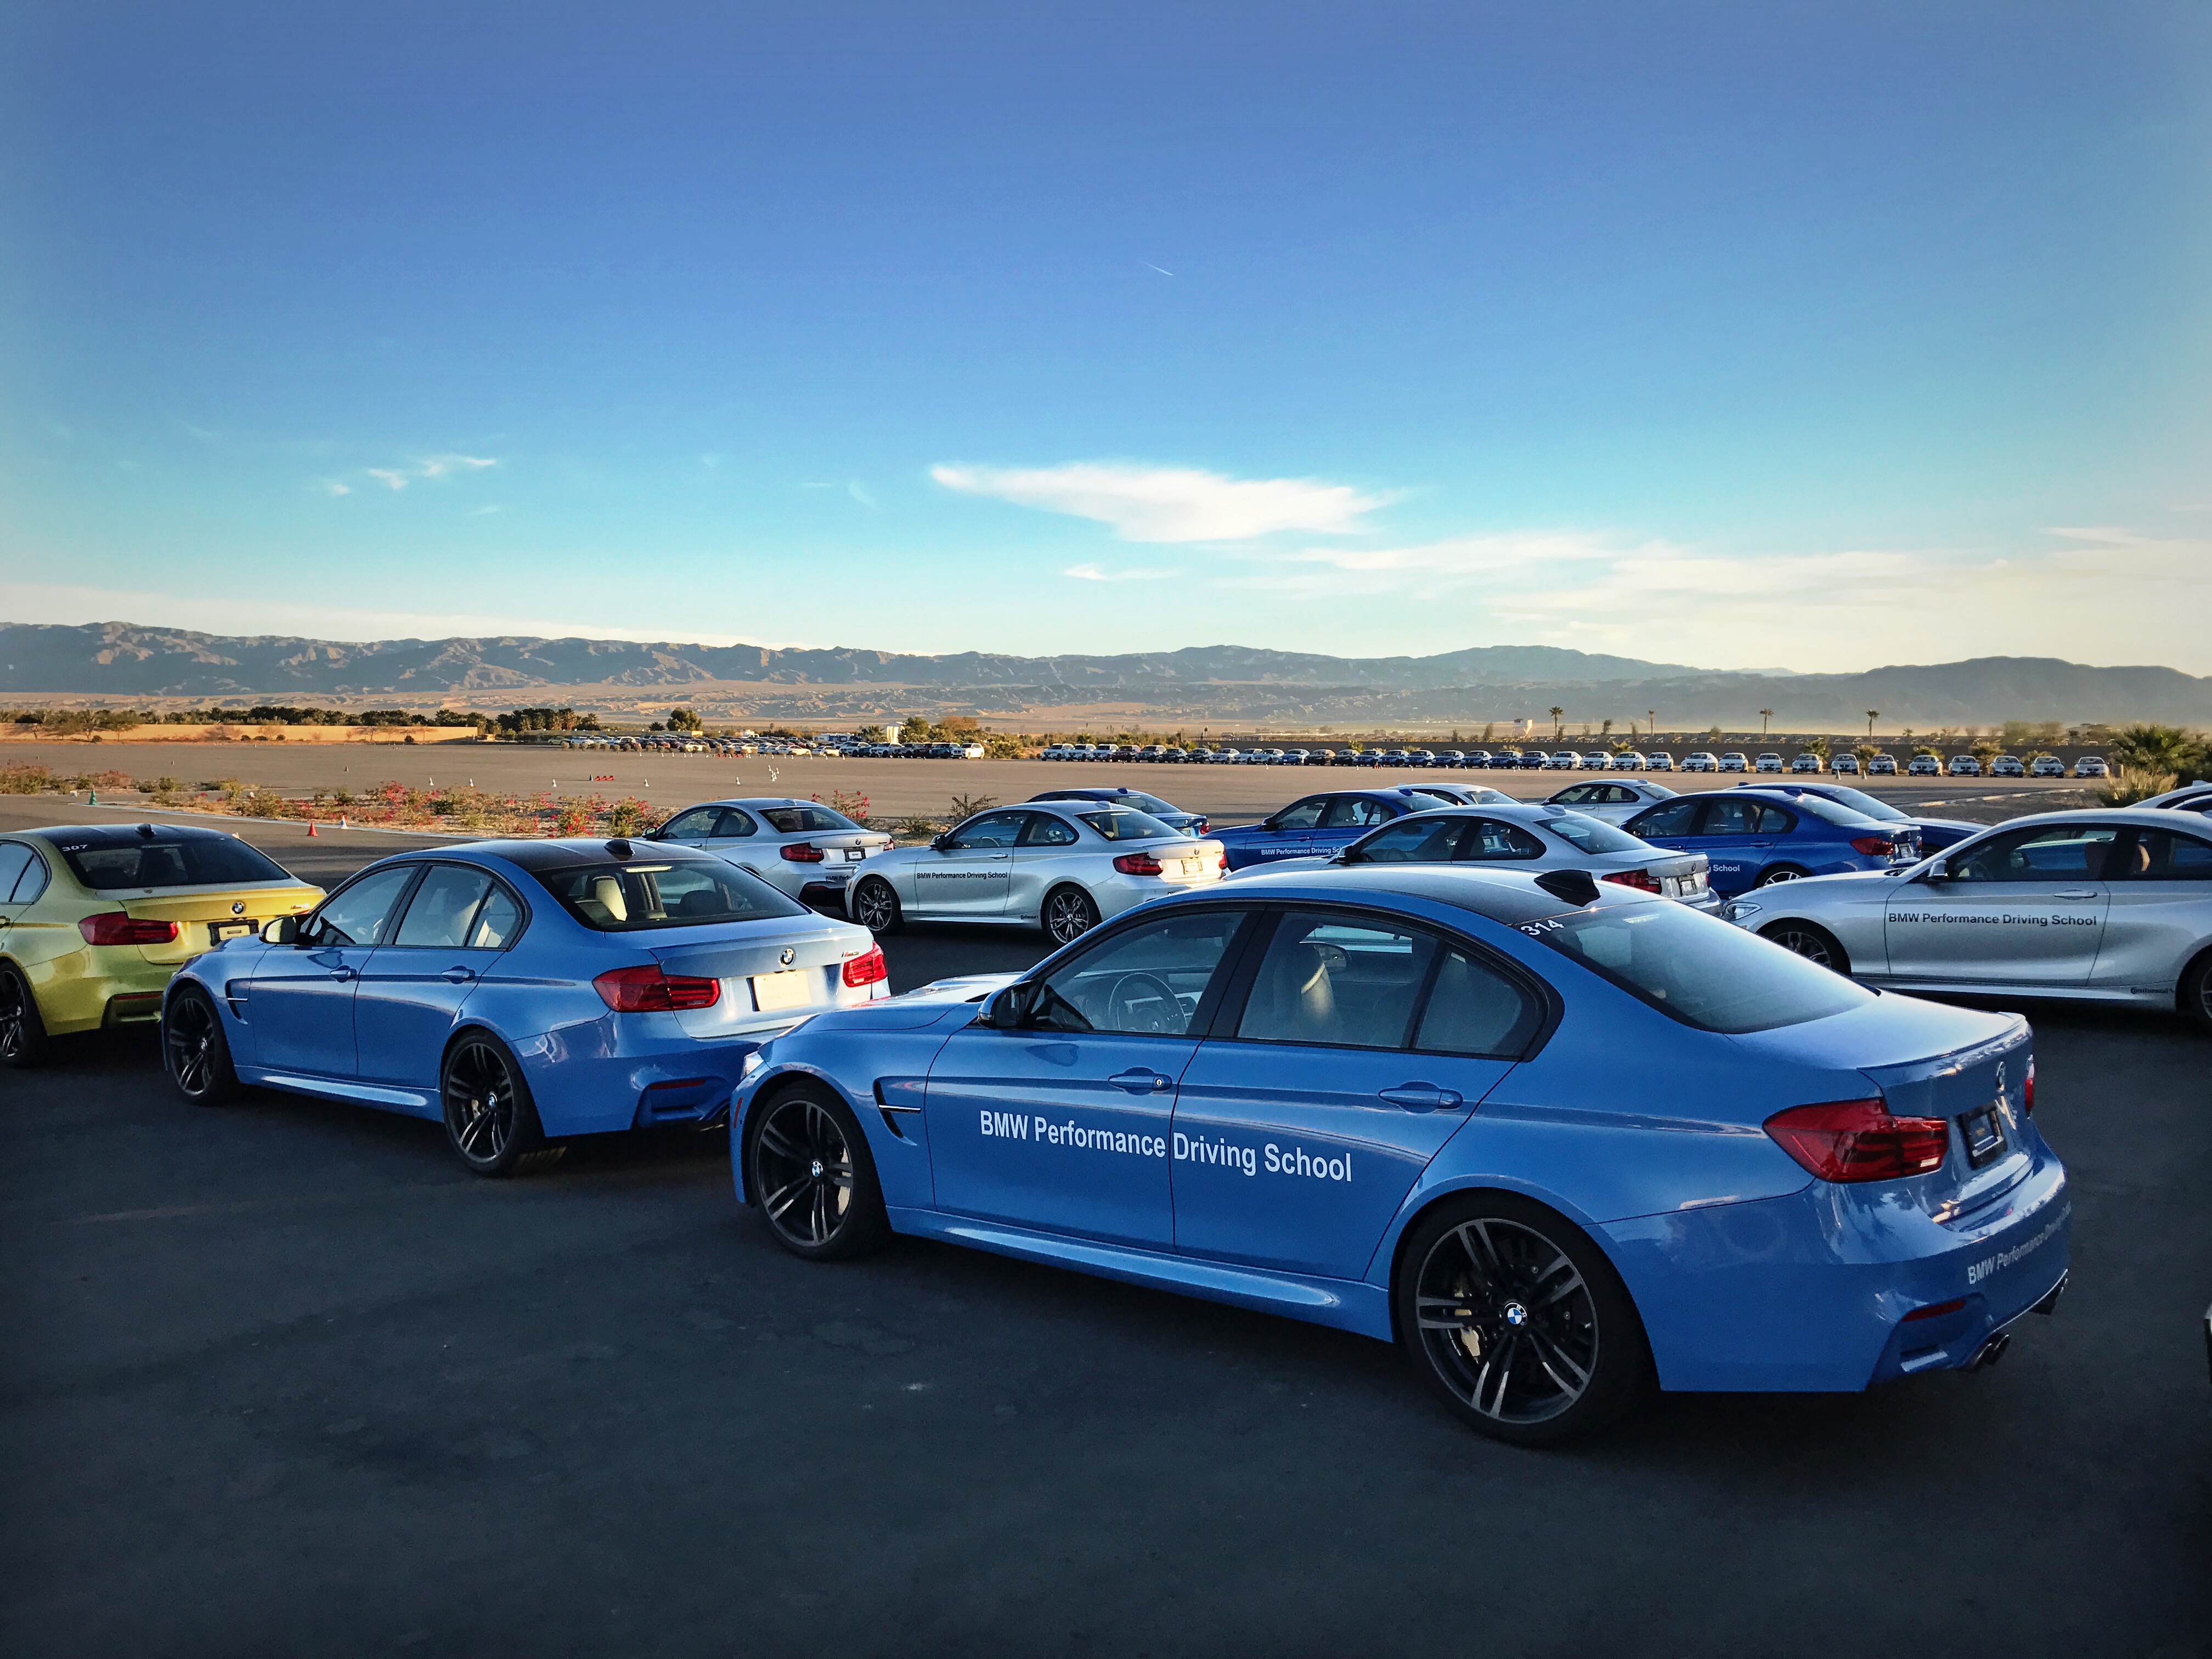 Burnt Rubber Oasis: The BMW Performance Driving School